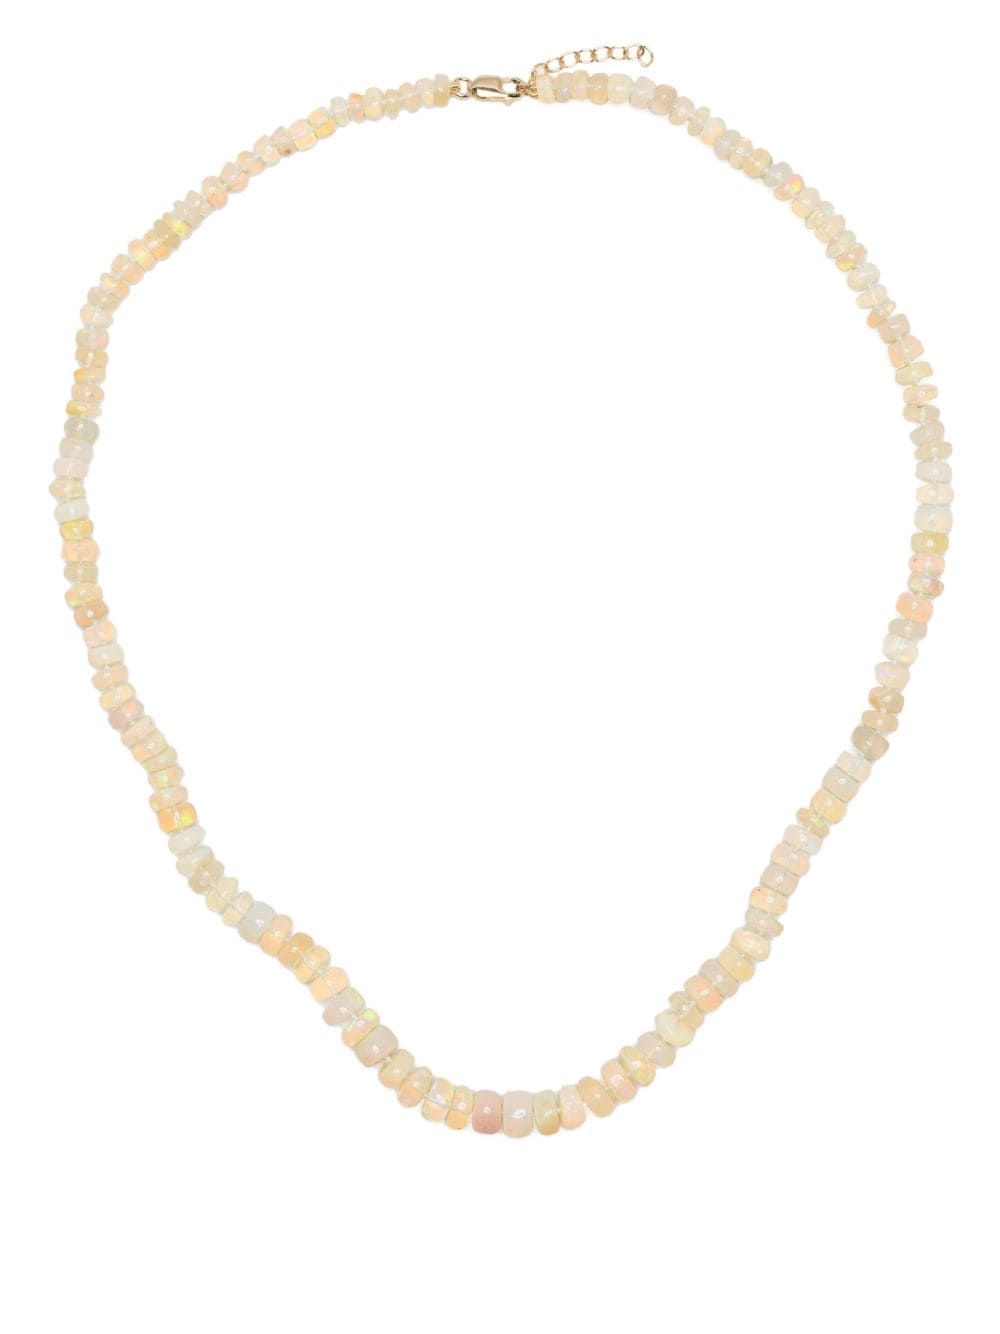 Jia Jia 14k Yellow Gold Atlas Opal Necklace In White